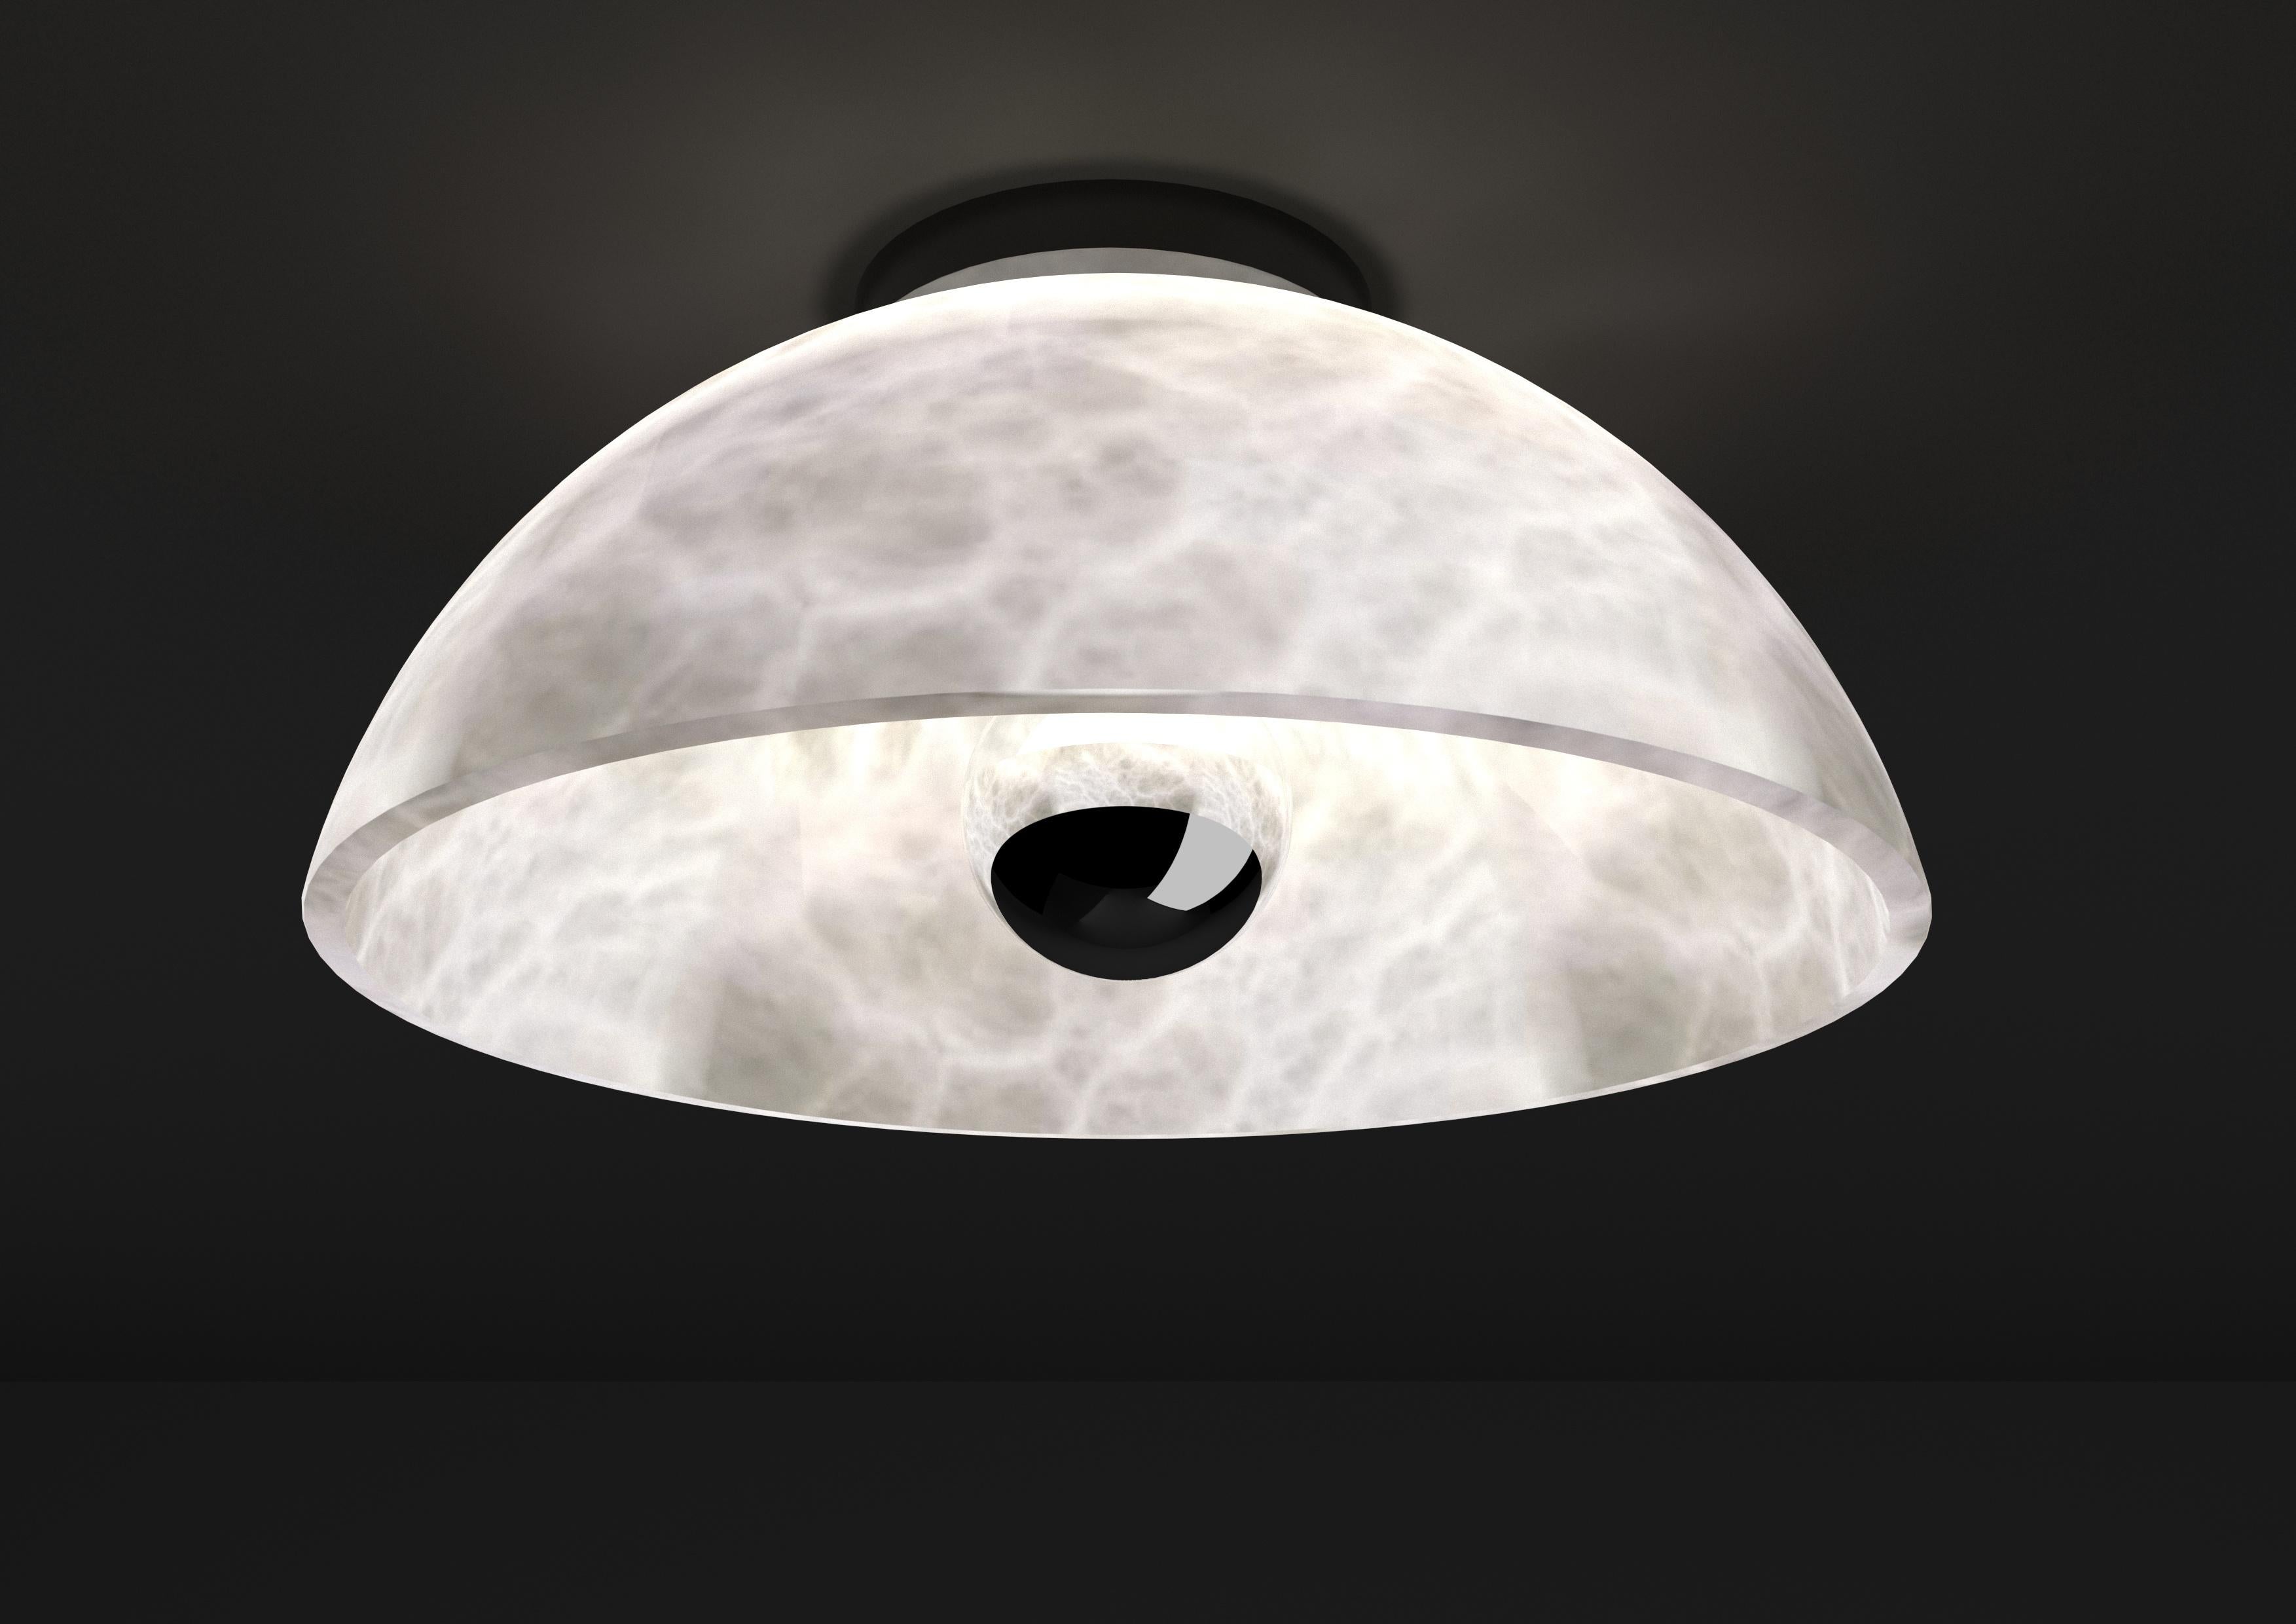 Apollo Shiny Black Metal Ceiling Lamp by Alabastro Italiano
Dimensions: Ø 30 x W 17,5 cm.
Materials: White alabaster and metal.

Available in different finishes: Shiny Silver, Bronze, Brushed Brass, Ruggine of Florence, Brushed Burnished, Shiny